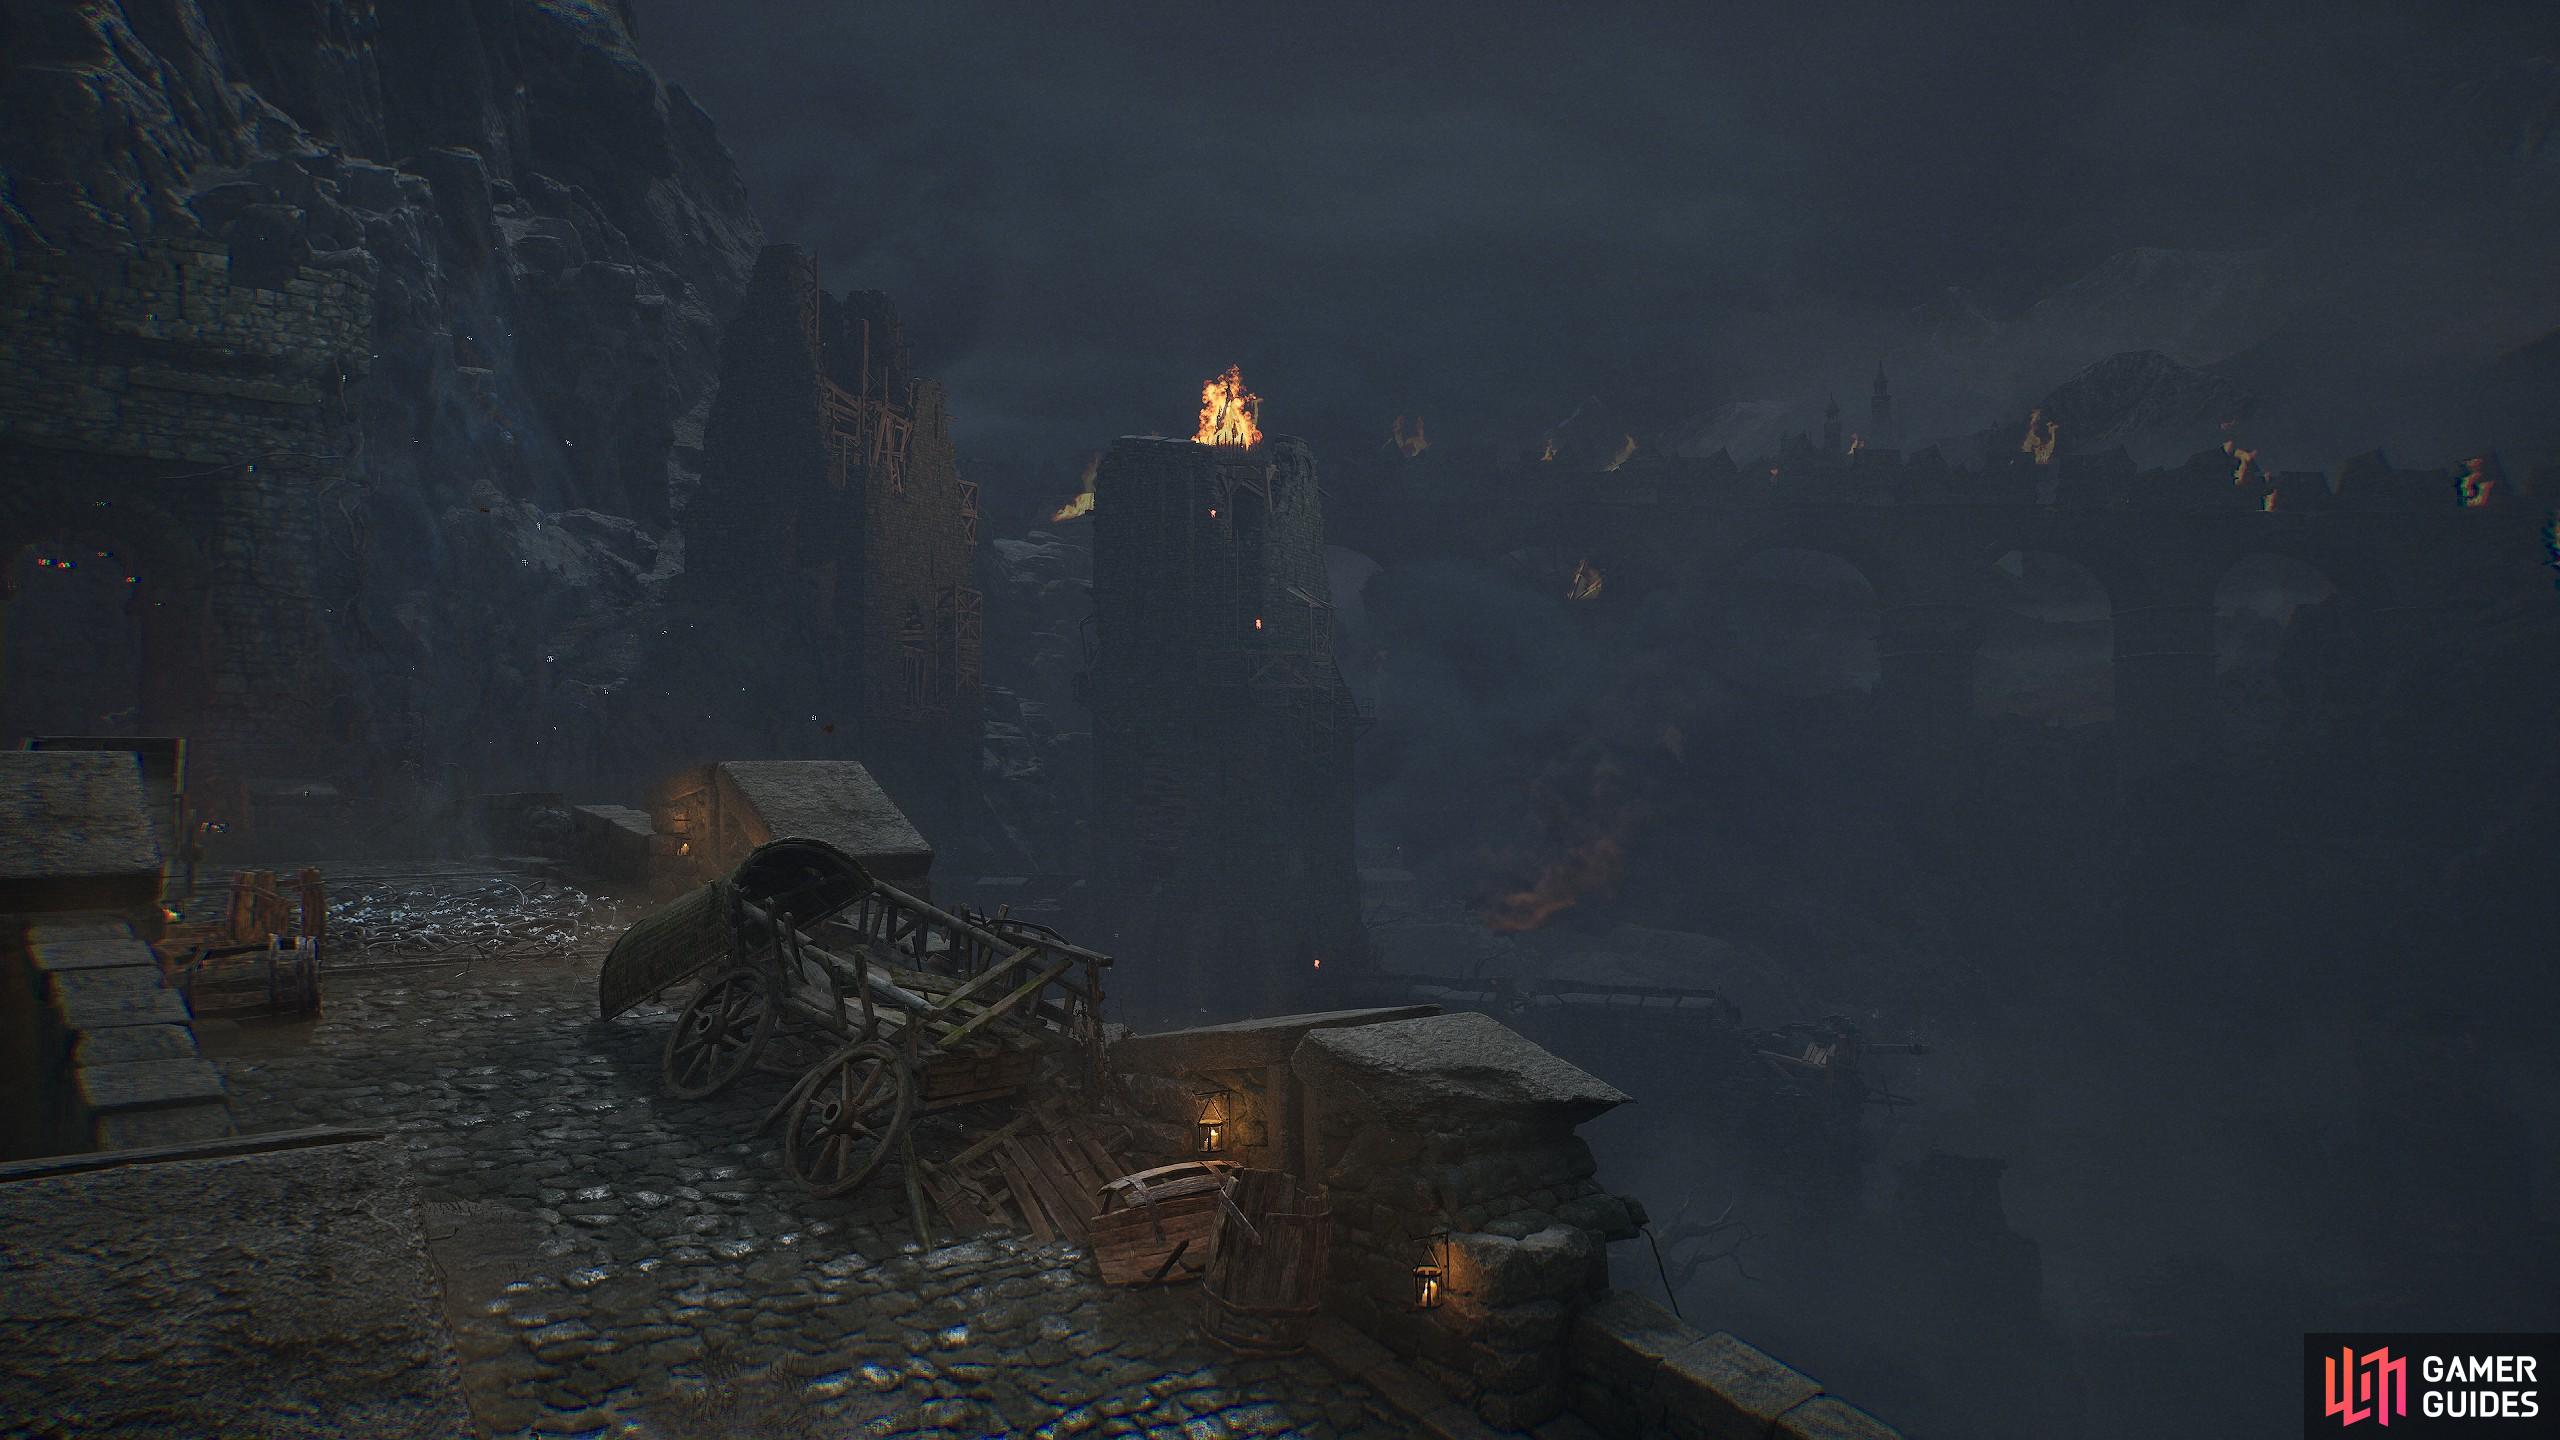 The land of mountain passes, and caves hold a few NPCs, optional boss fights,  hidden PvP Shrines, and other interesting side content to find in the ruined garden and tower.